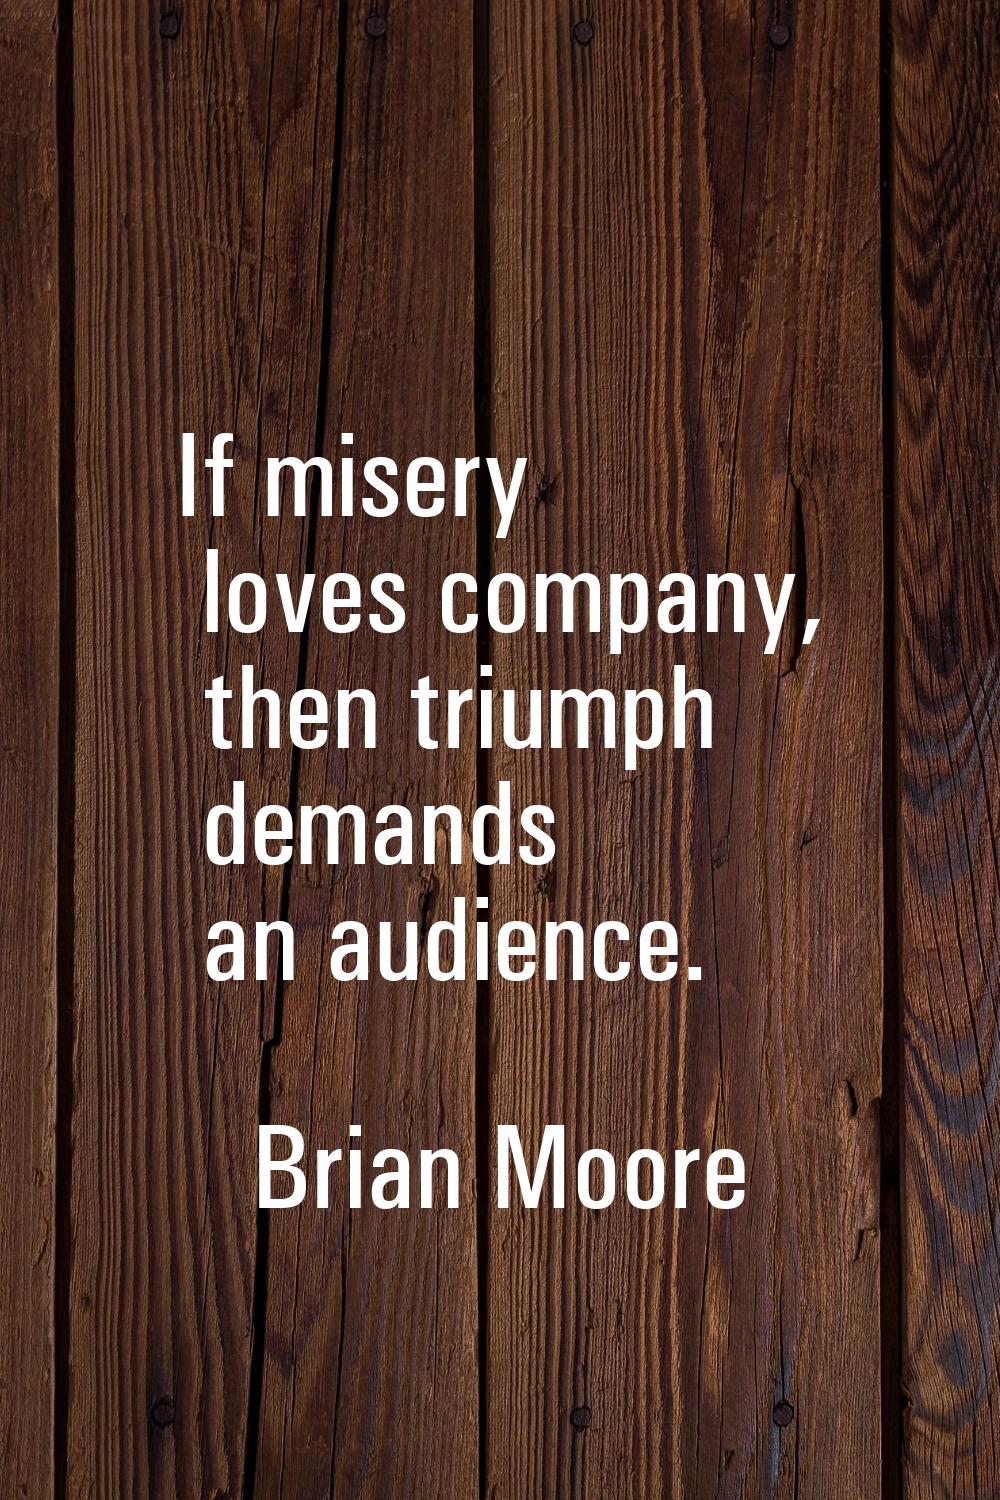 If misery loves company, then triumph demands an audience.